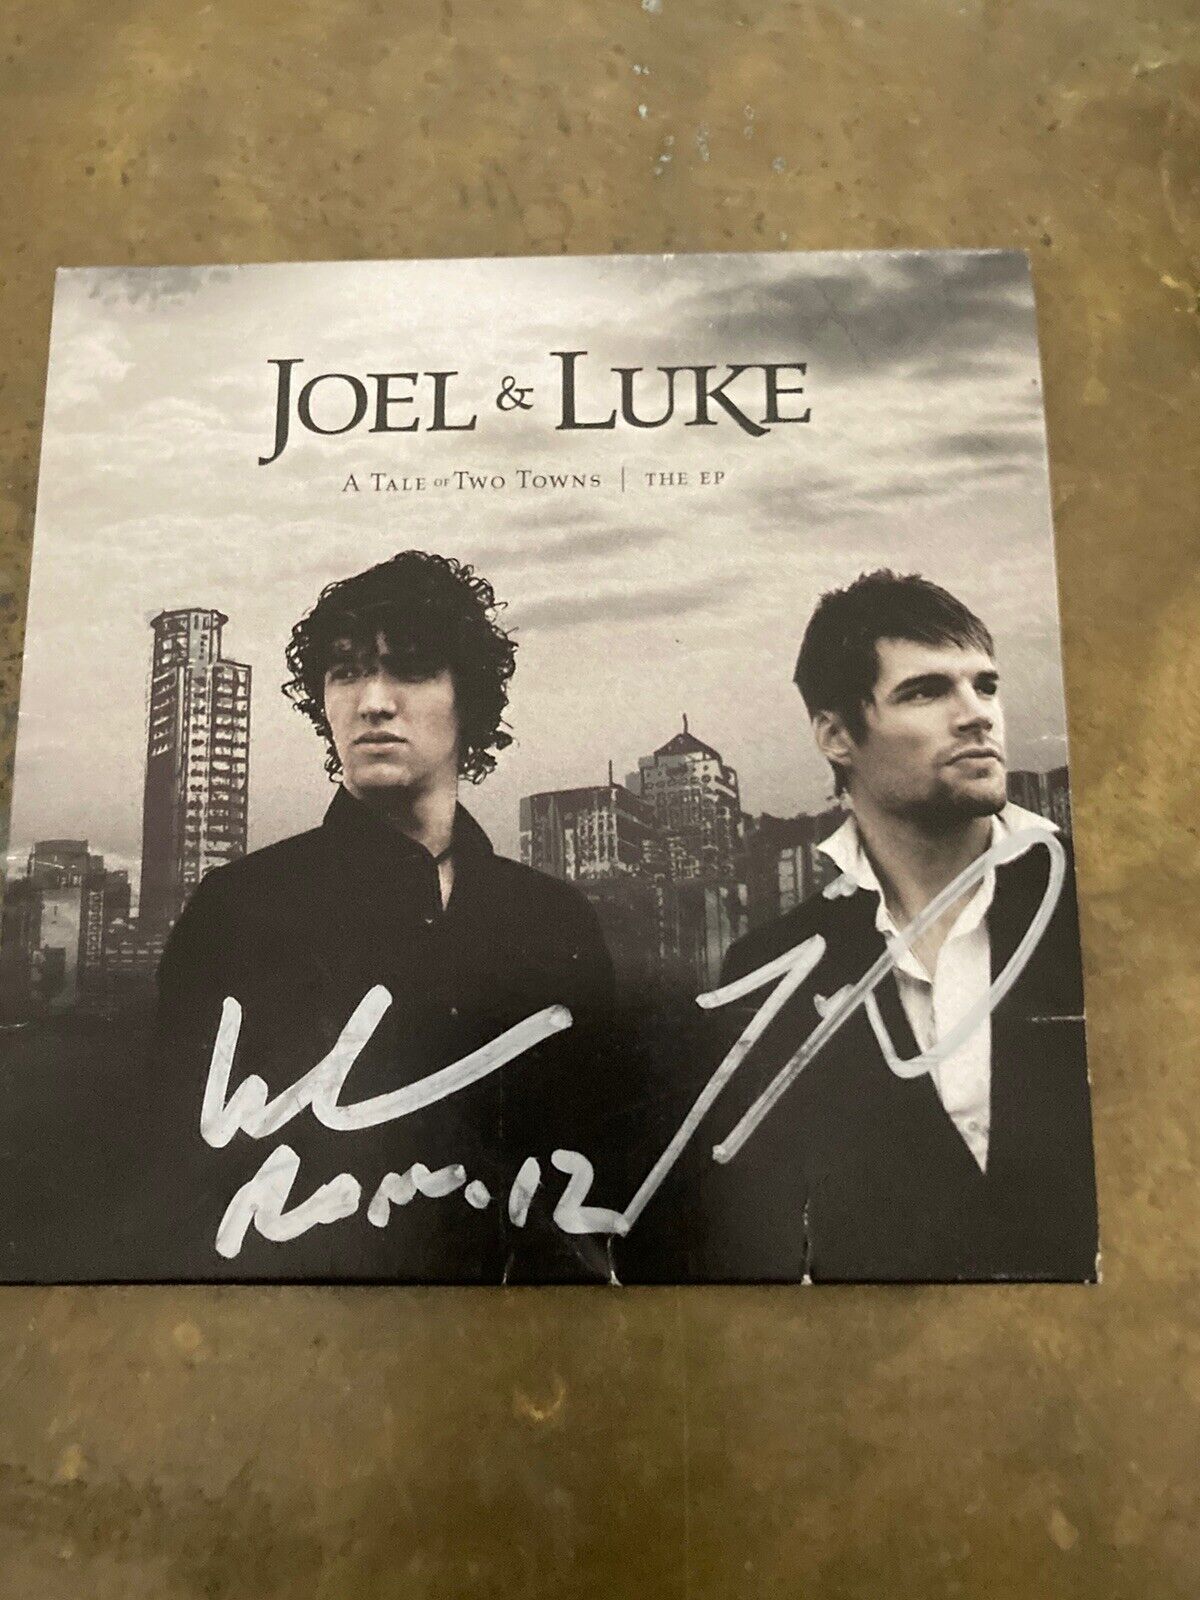 Joel And Luke Autograph On A Tale Of Two Towns CD Cover For King & Country